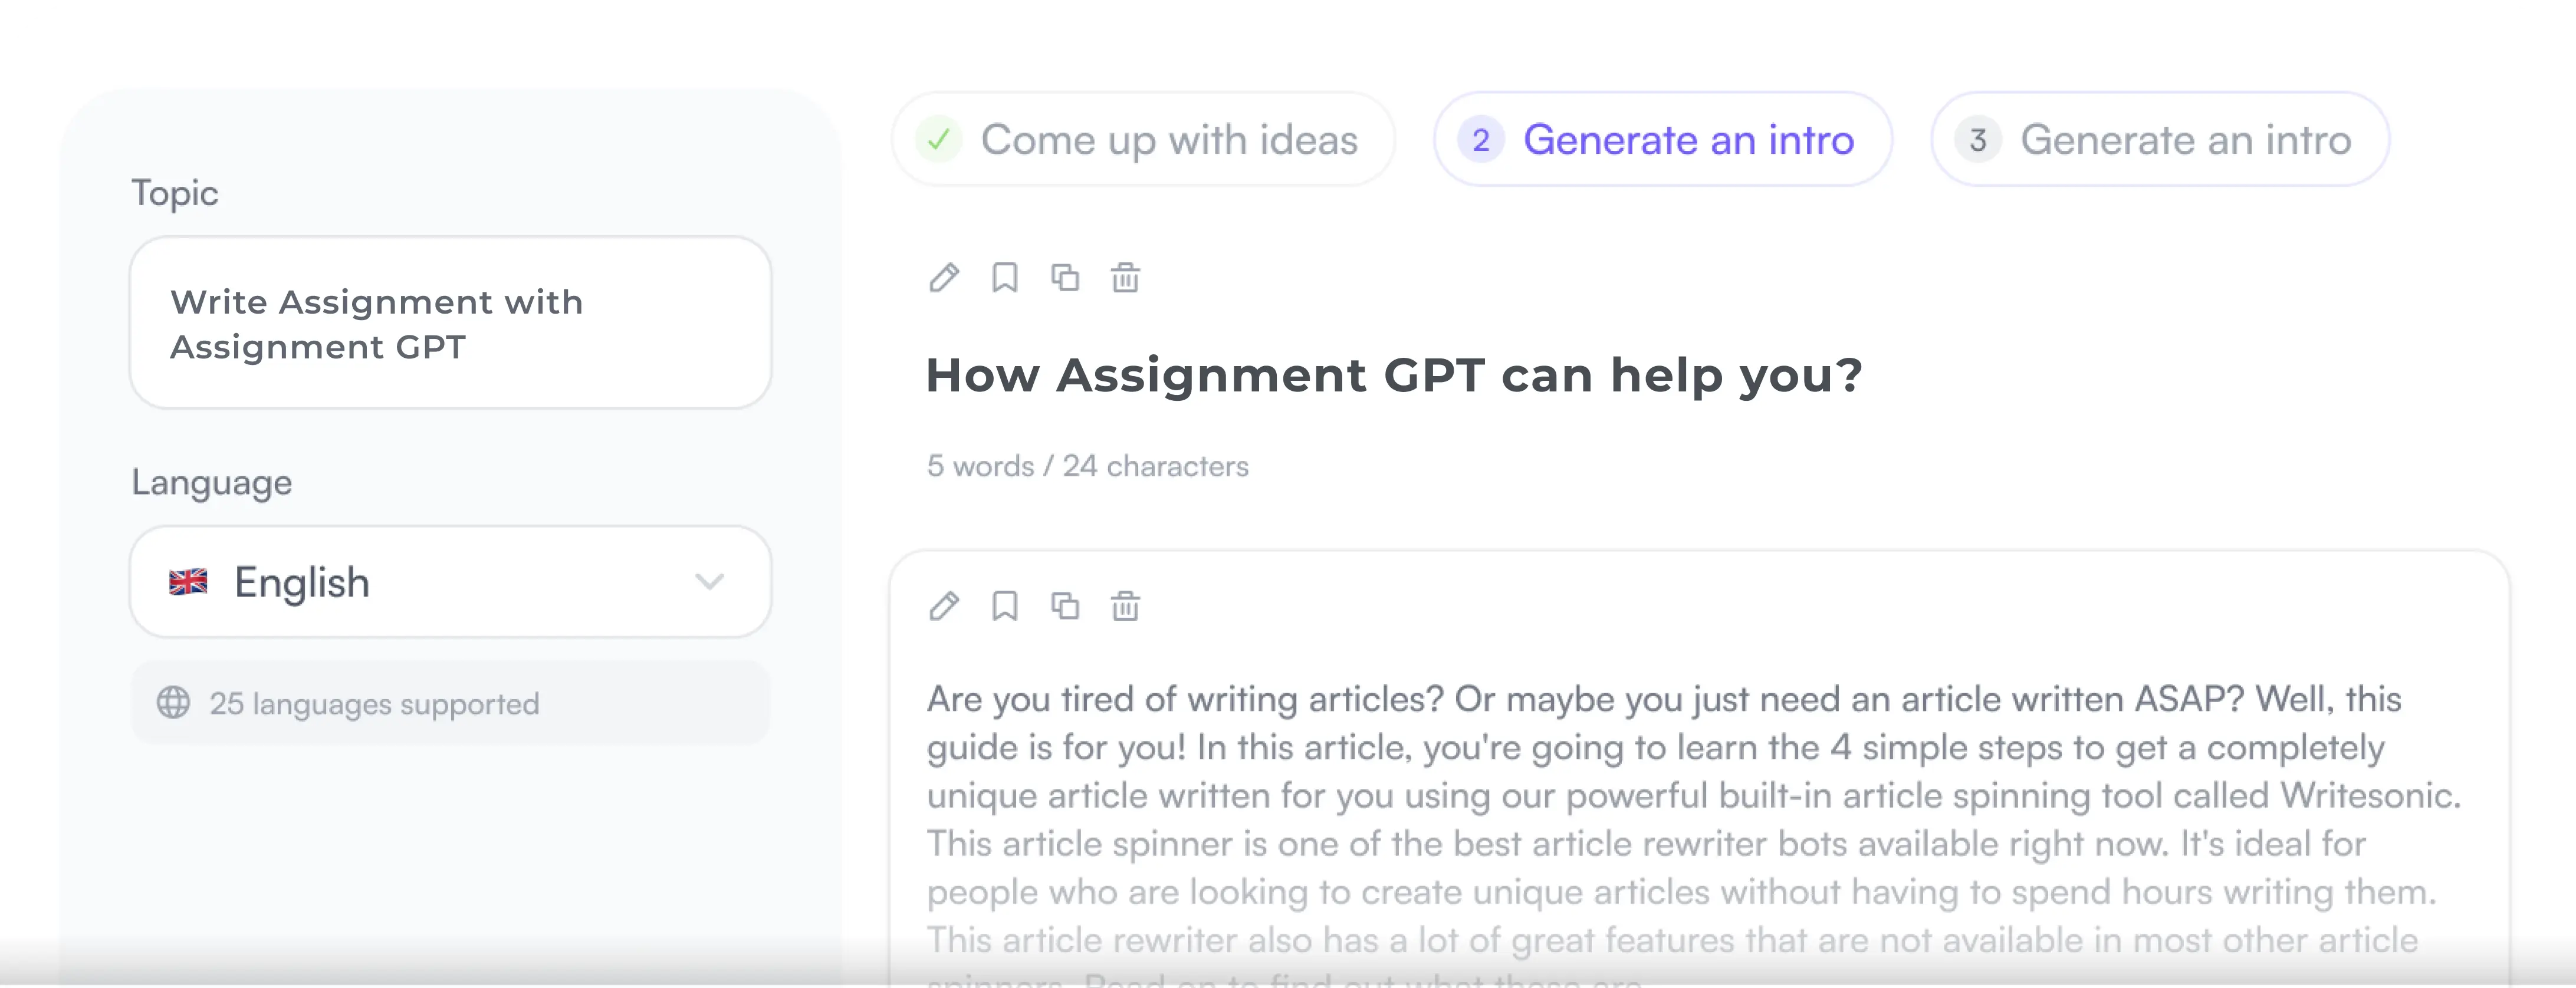 Get started with Assignment GPT!